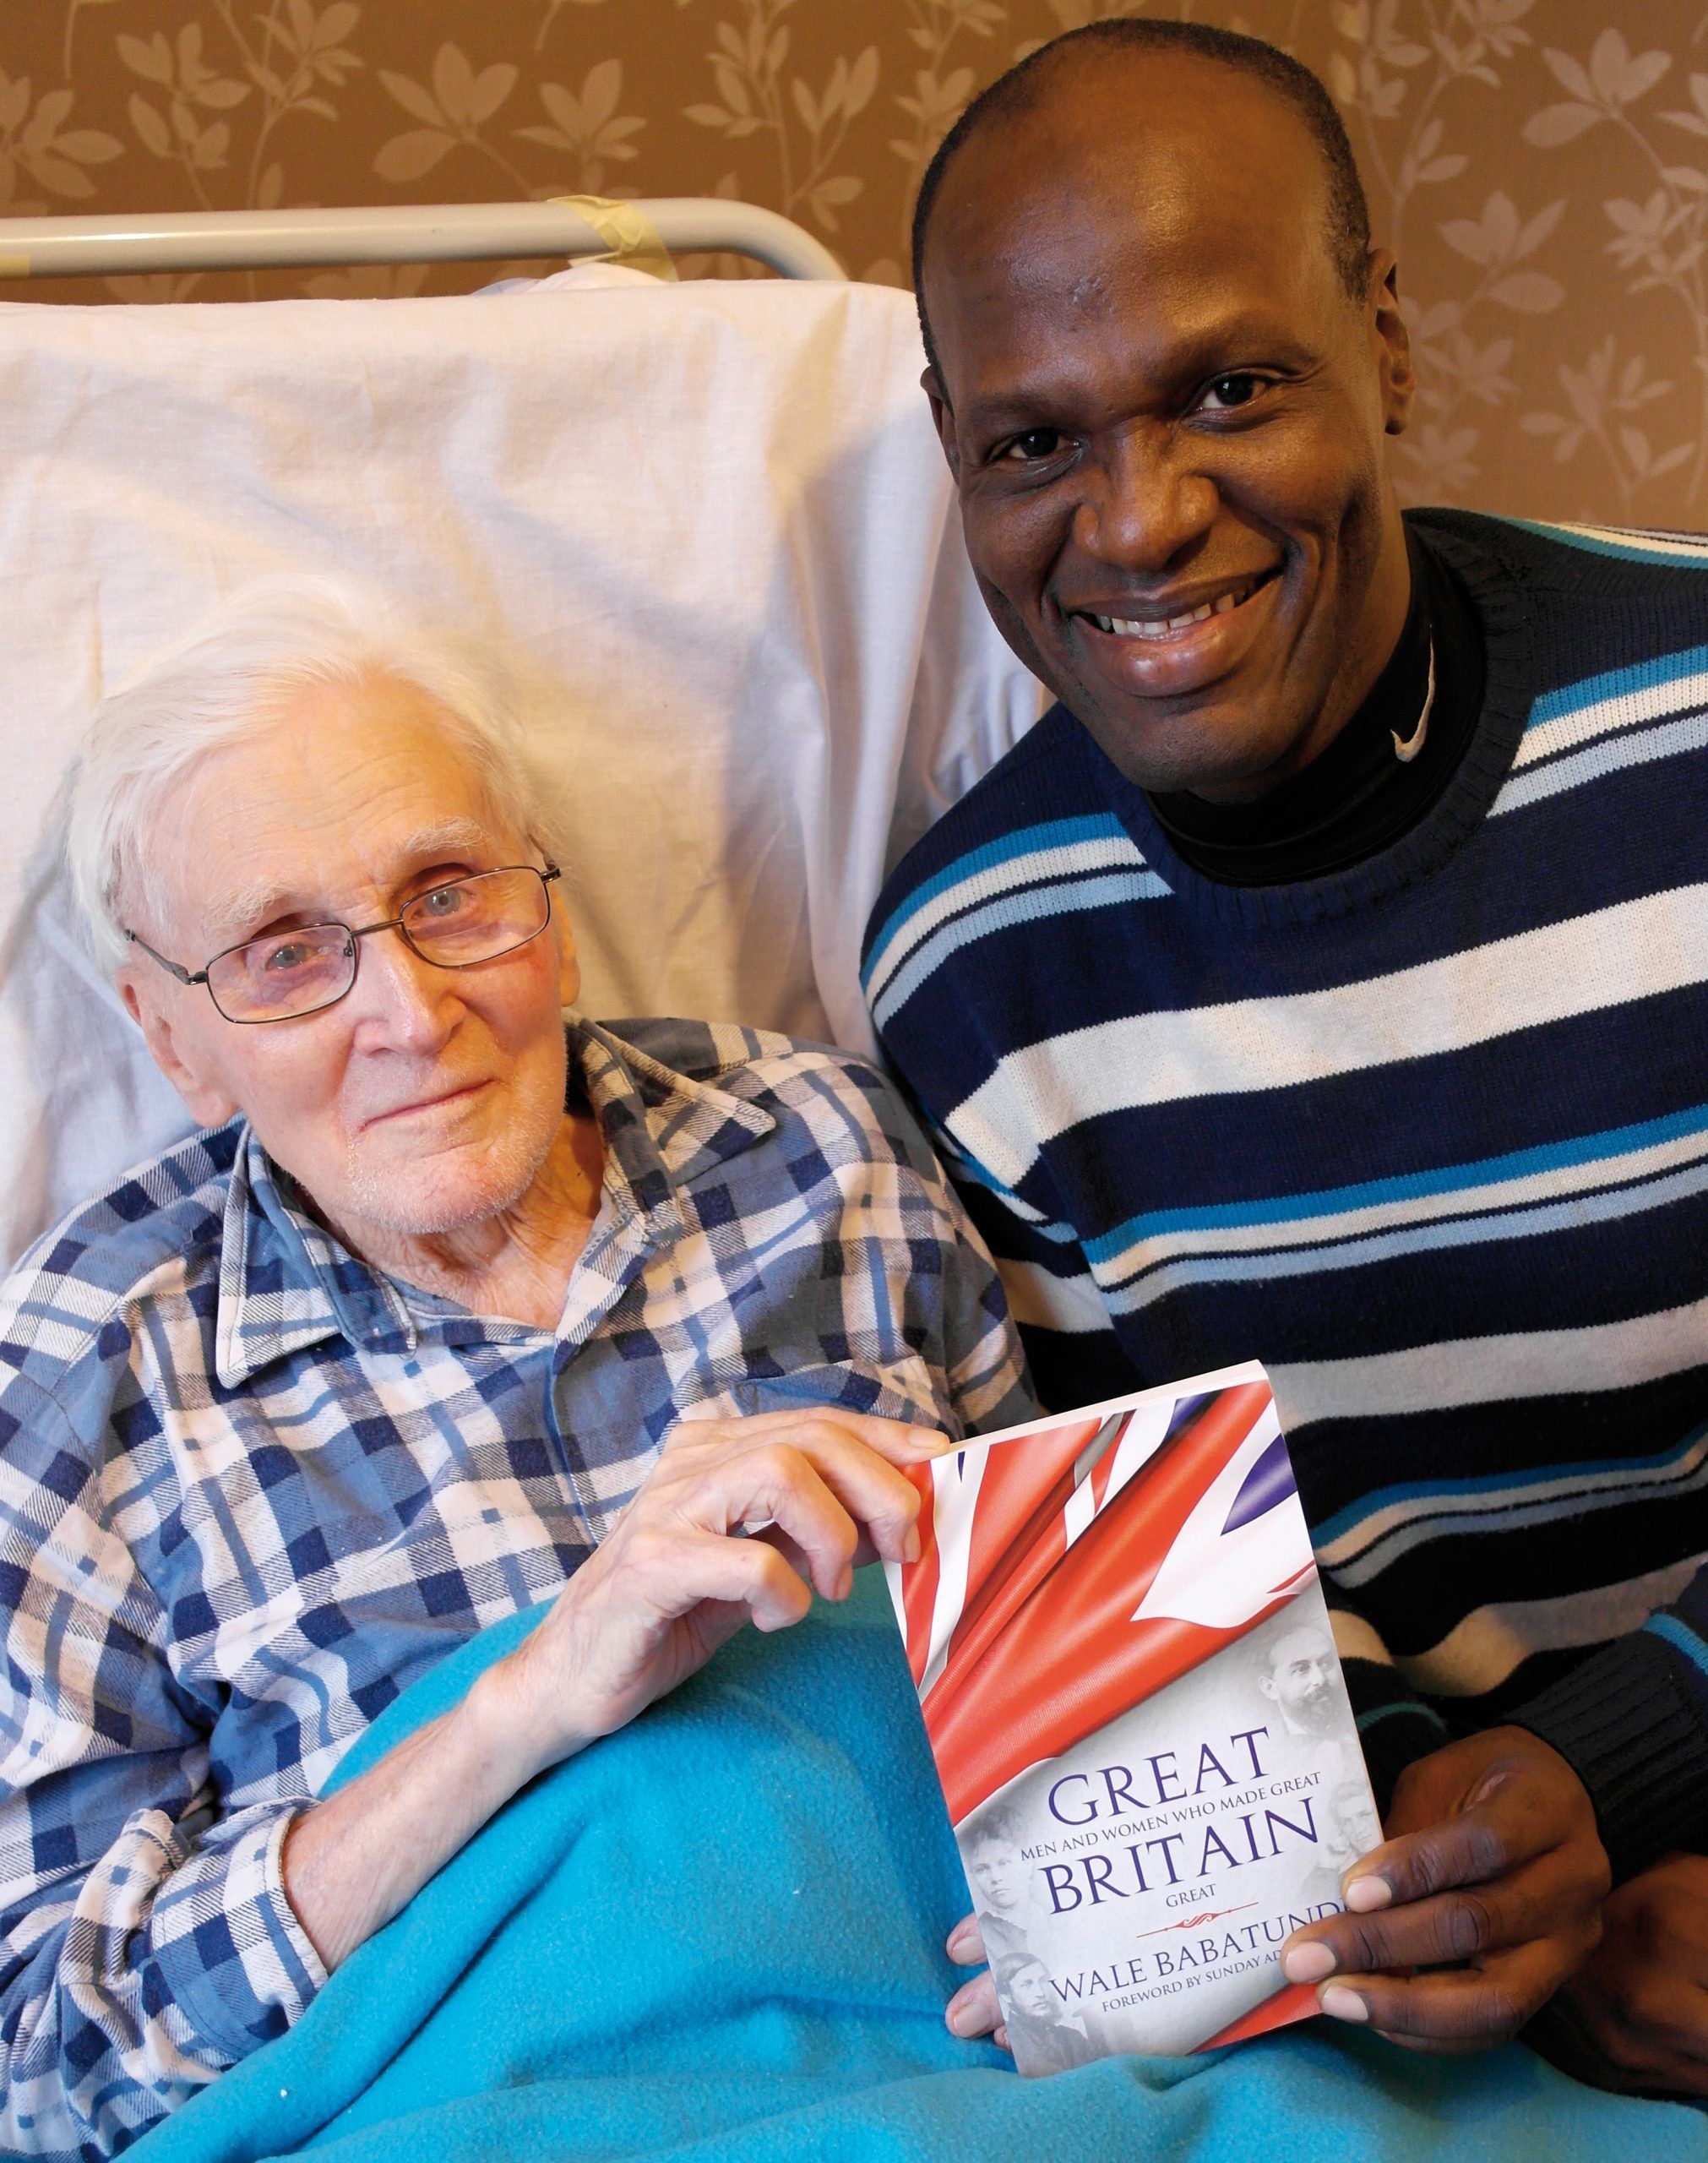 Spiritual warriors: former RAF ace and moral campaigner Steve Stevens enjoyed a visit from Wale Babatunde, London pastor and author